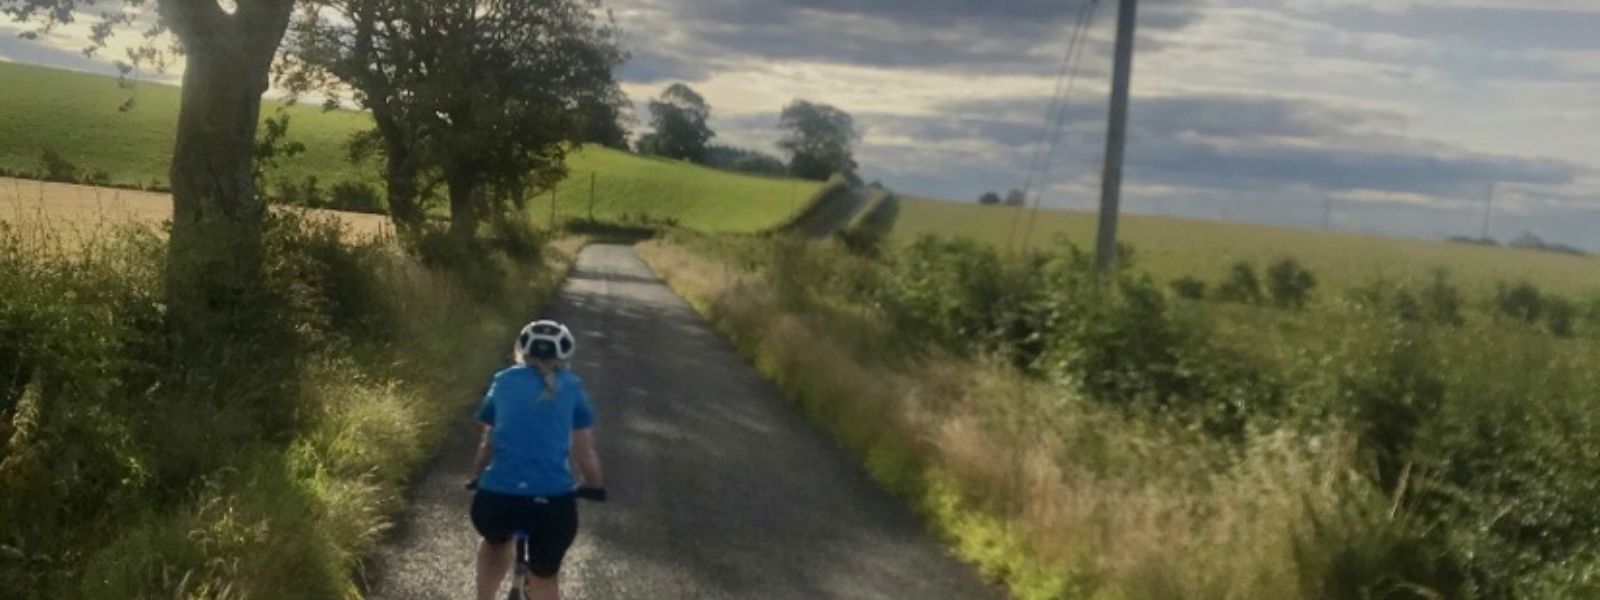 Conference and Events Officer Sarah McLeary cycles her bike along a countryside road